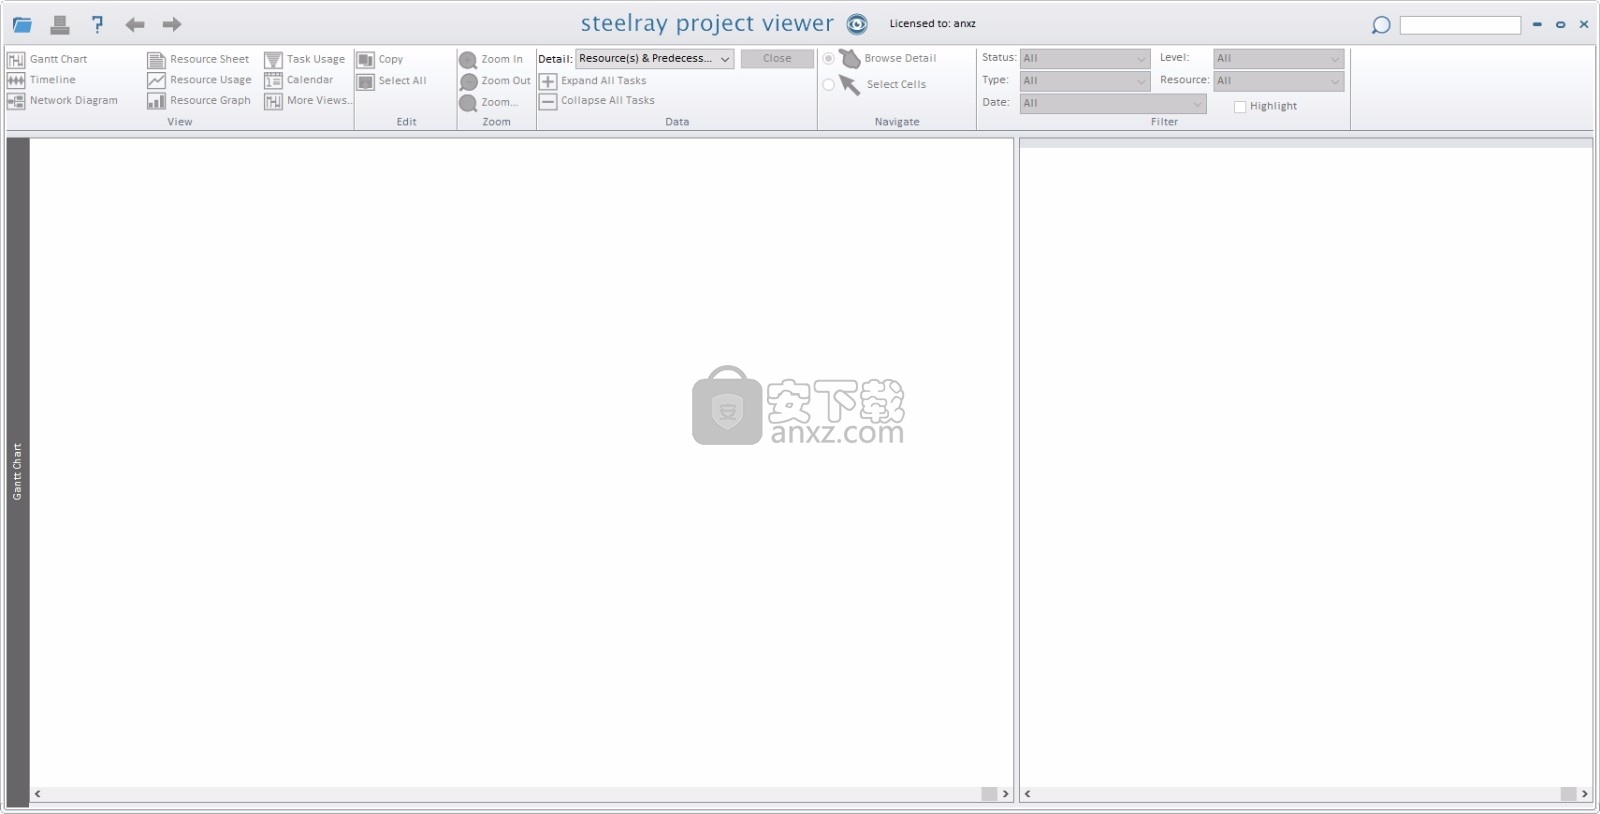 Steelray Project Viewer 6.19 instal the new version for ios